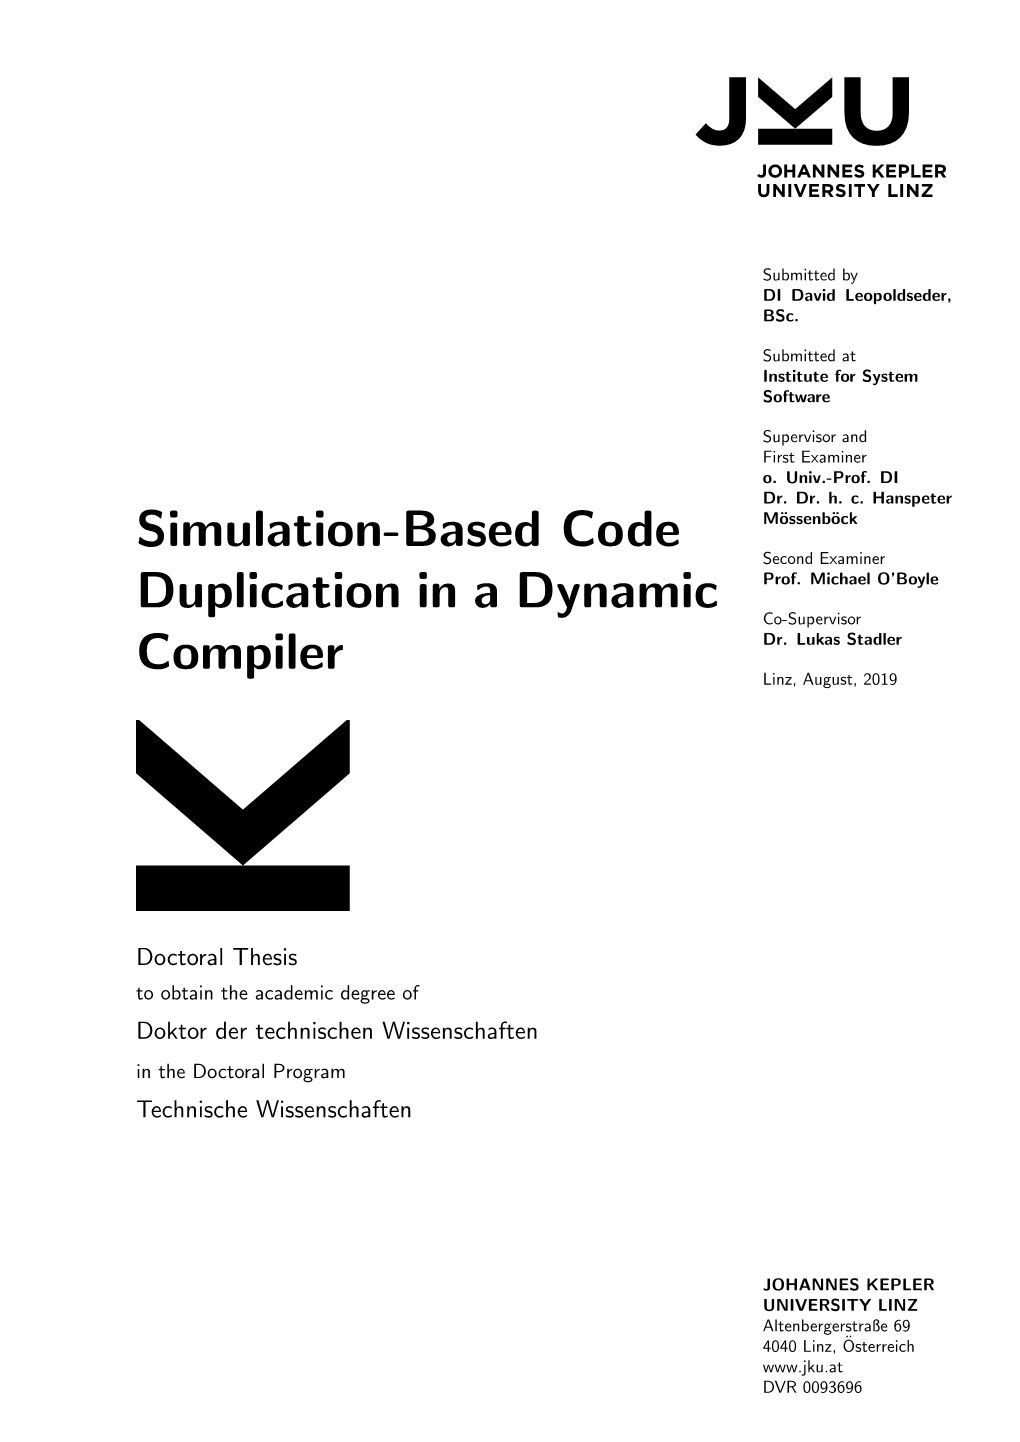 Simulation-Based Code Duplication in a Dynamic Compiler